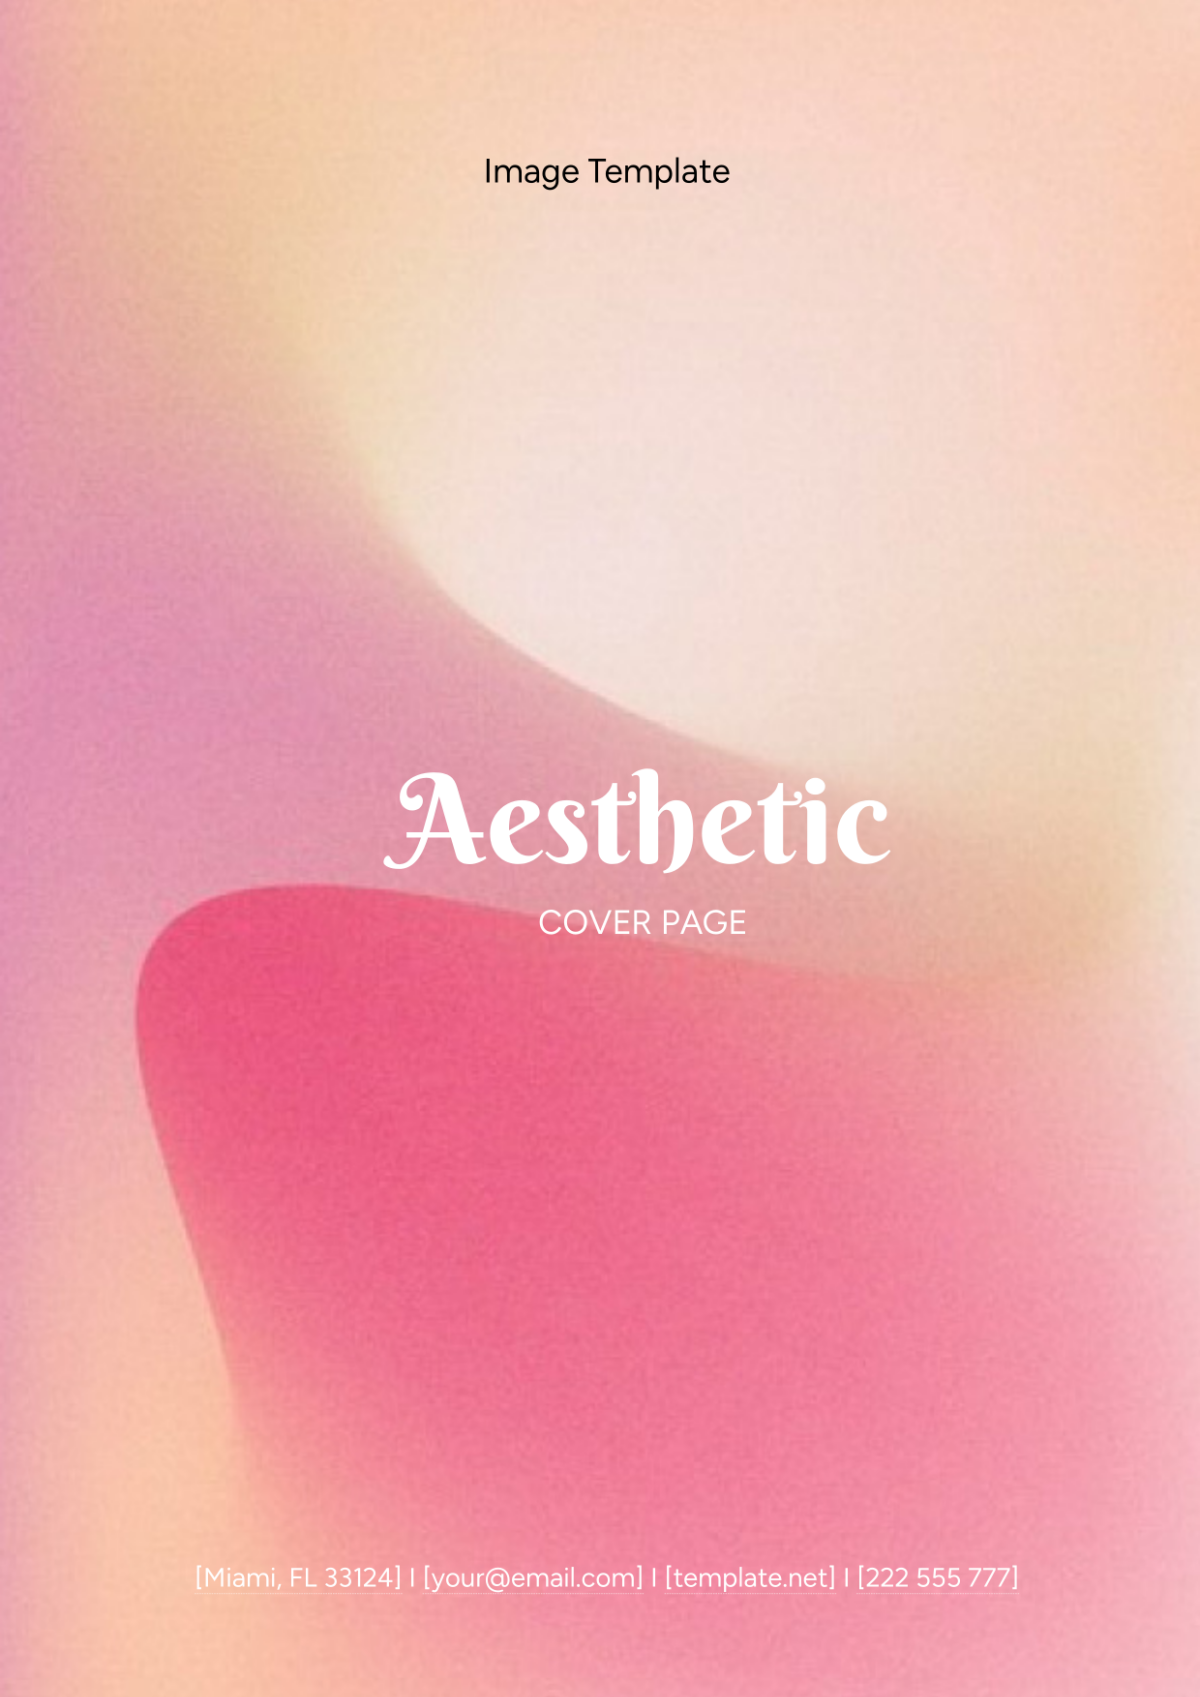 Aesthetic Cover Page Image